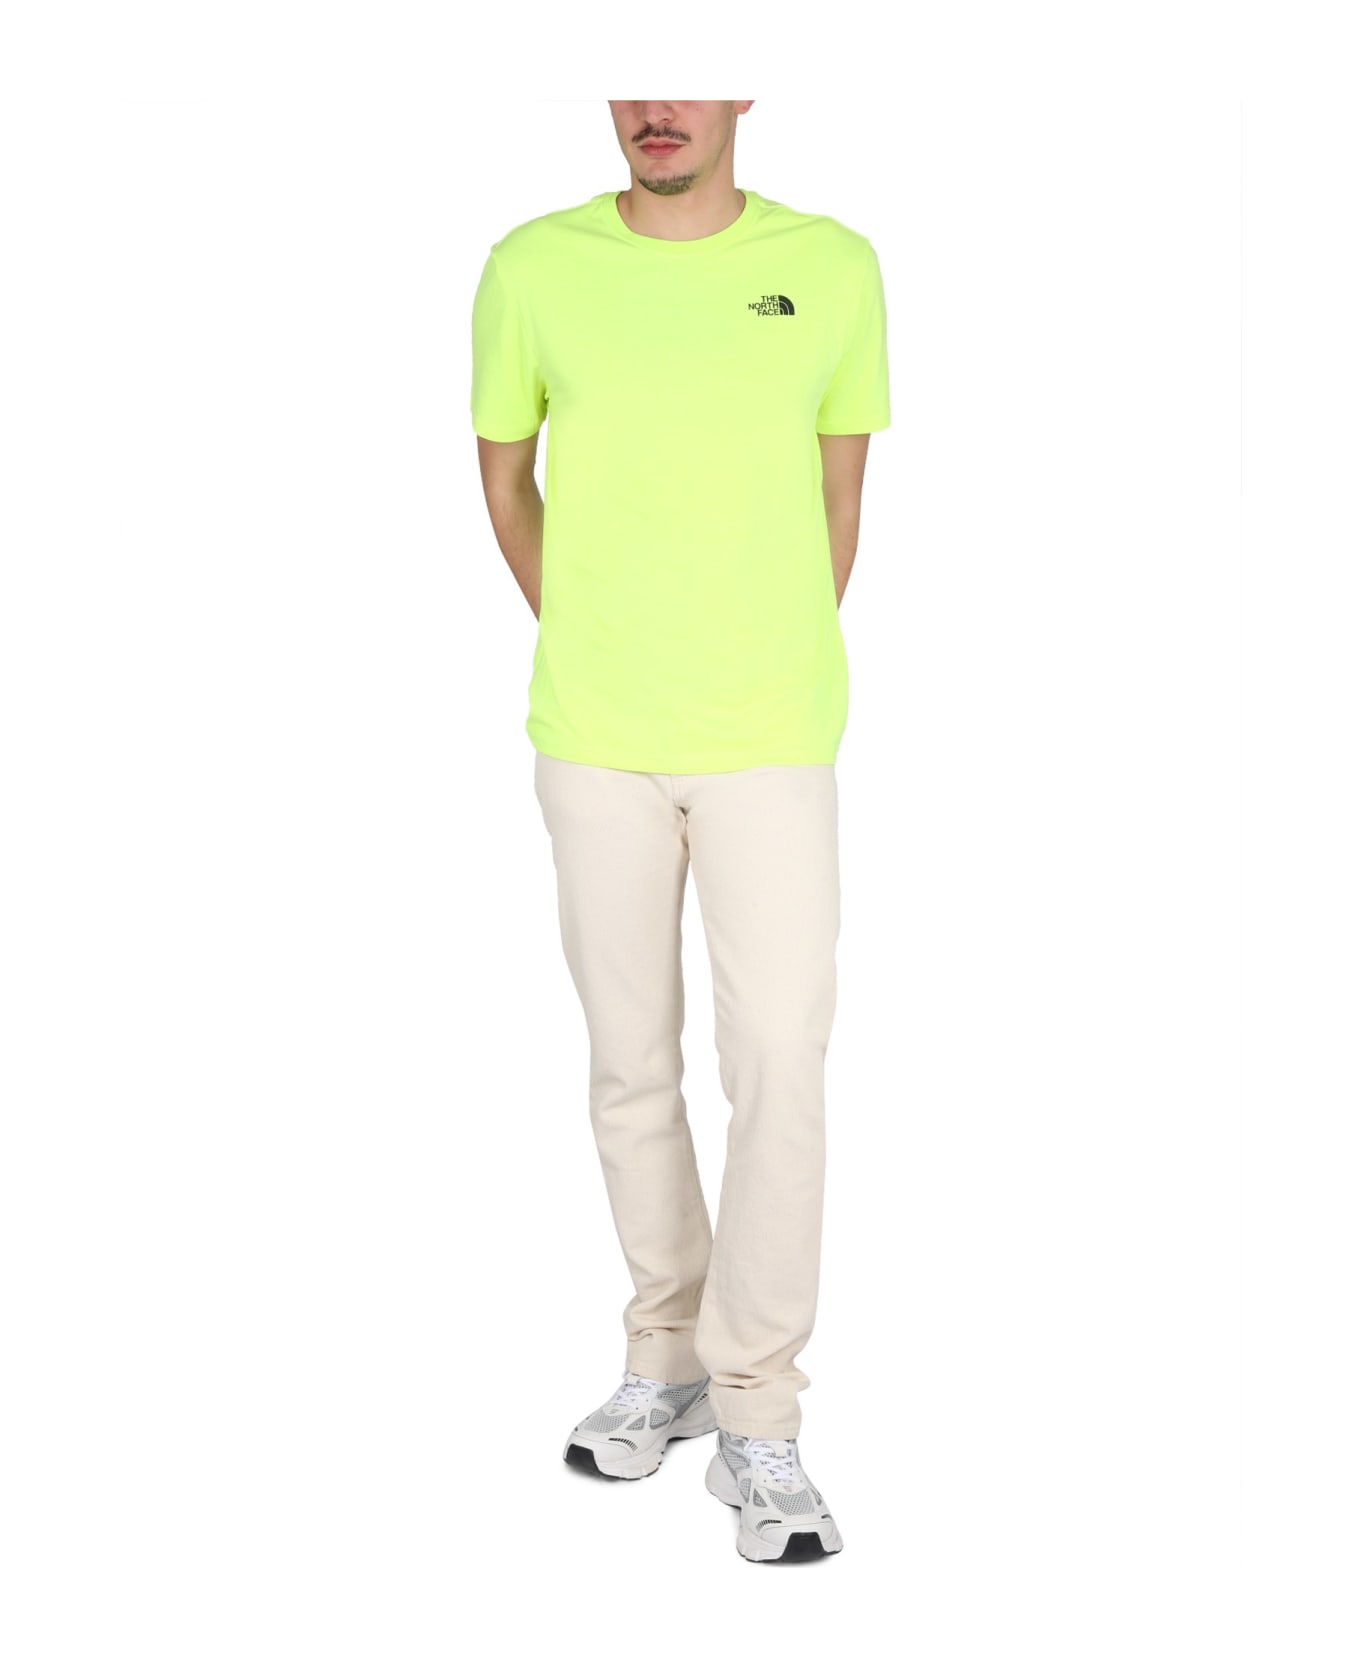 The North Face Redbox Reaxion T-shirt - YELLOW